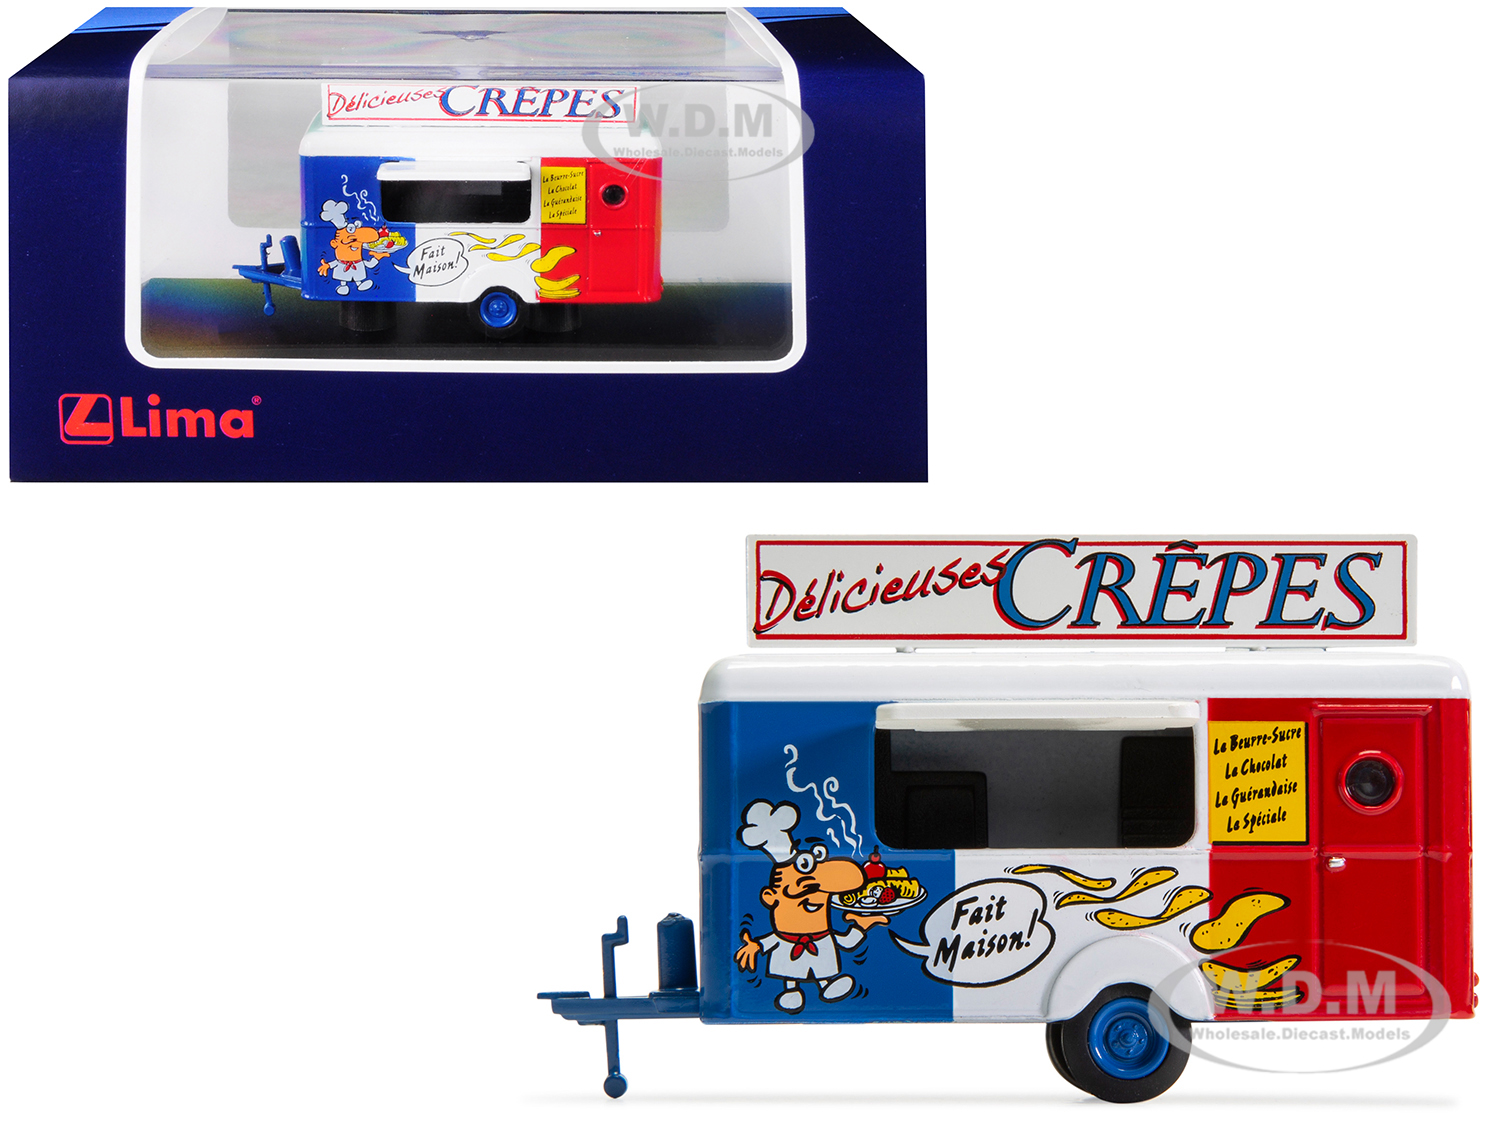 Mobile Food Trailer "Delicieuses Crepes" (France) 1/87 (HO) Scale Diecast Model by Lima